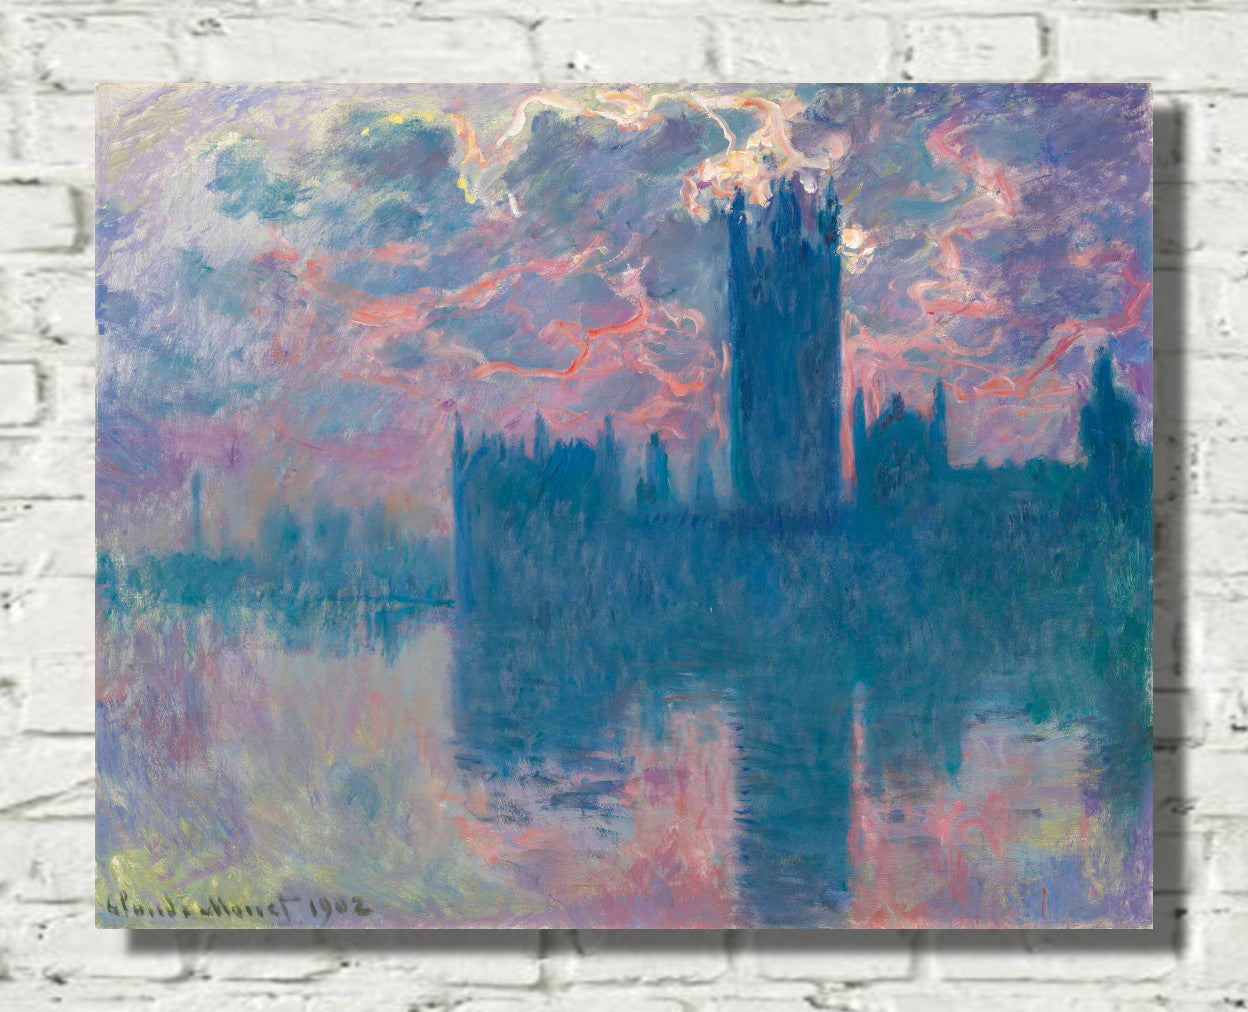 Houses of Parliament, sunset by Claude Monet